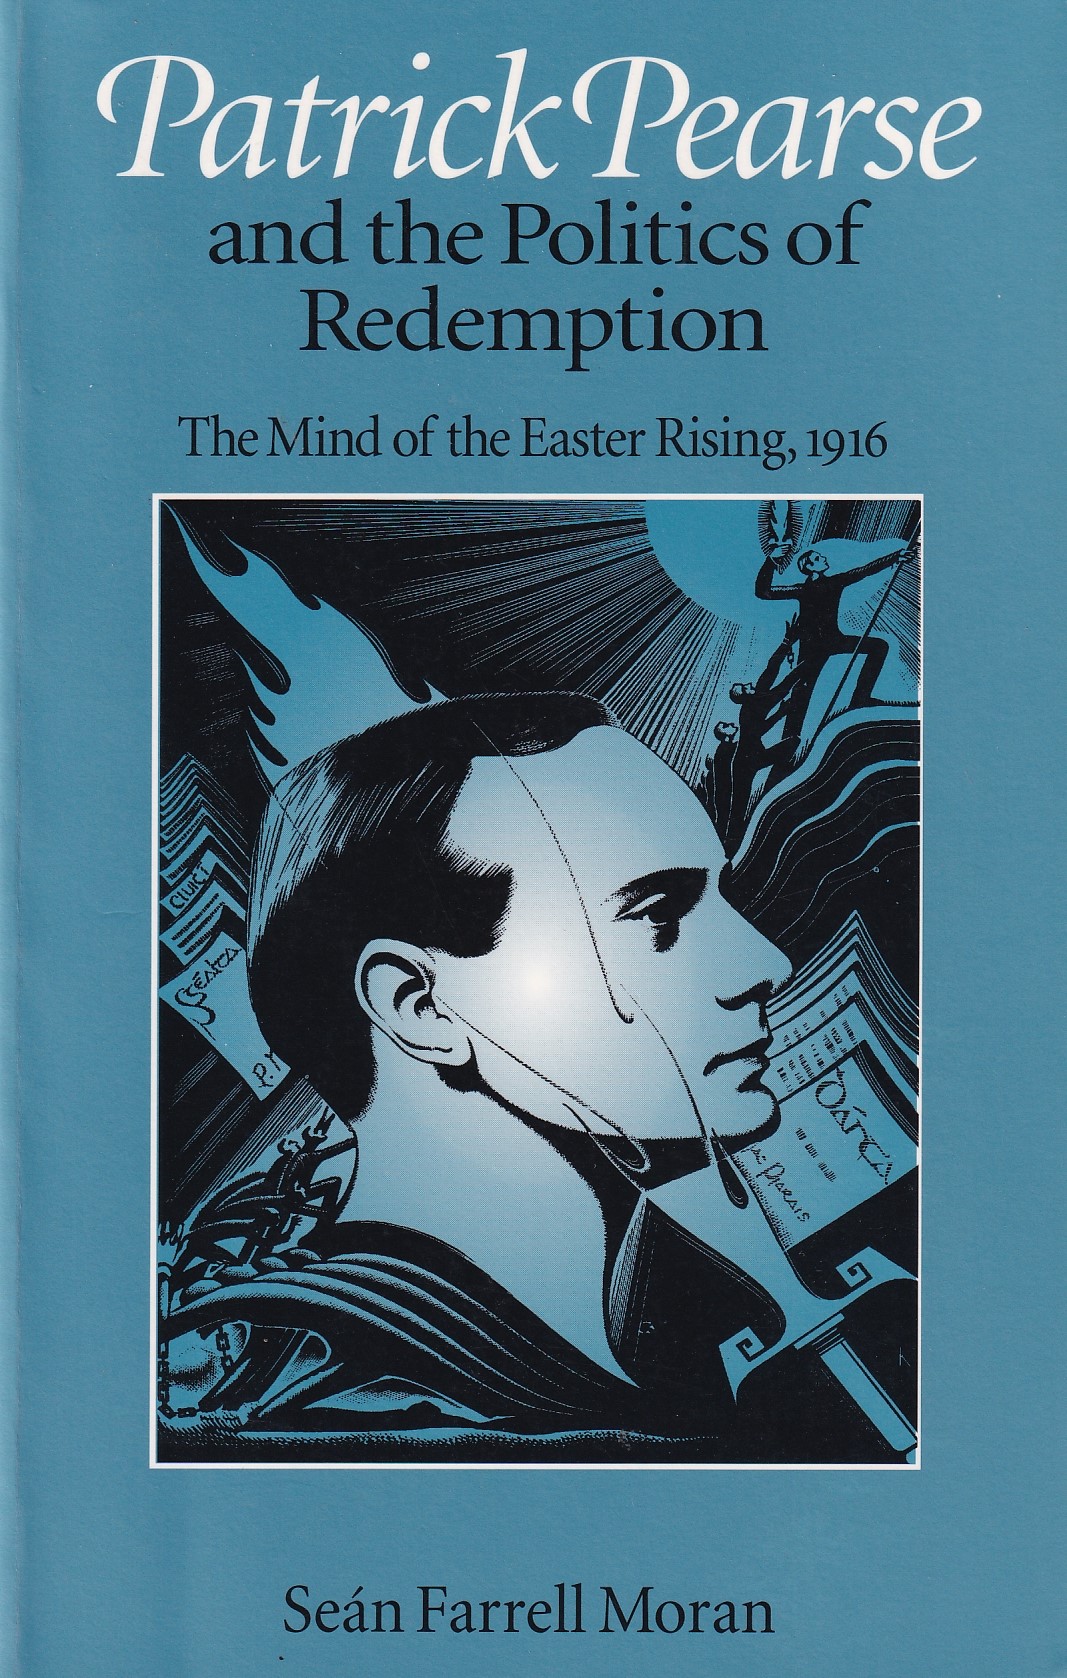 Patrick Pearse and the Politics of Redemption: The Mind of the Easter Rising, 1916 | Seán Farrell Moran | Charlie Byrne's